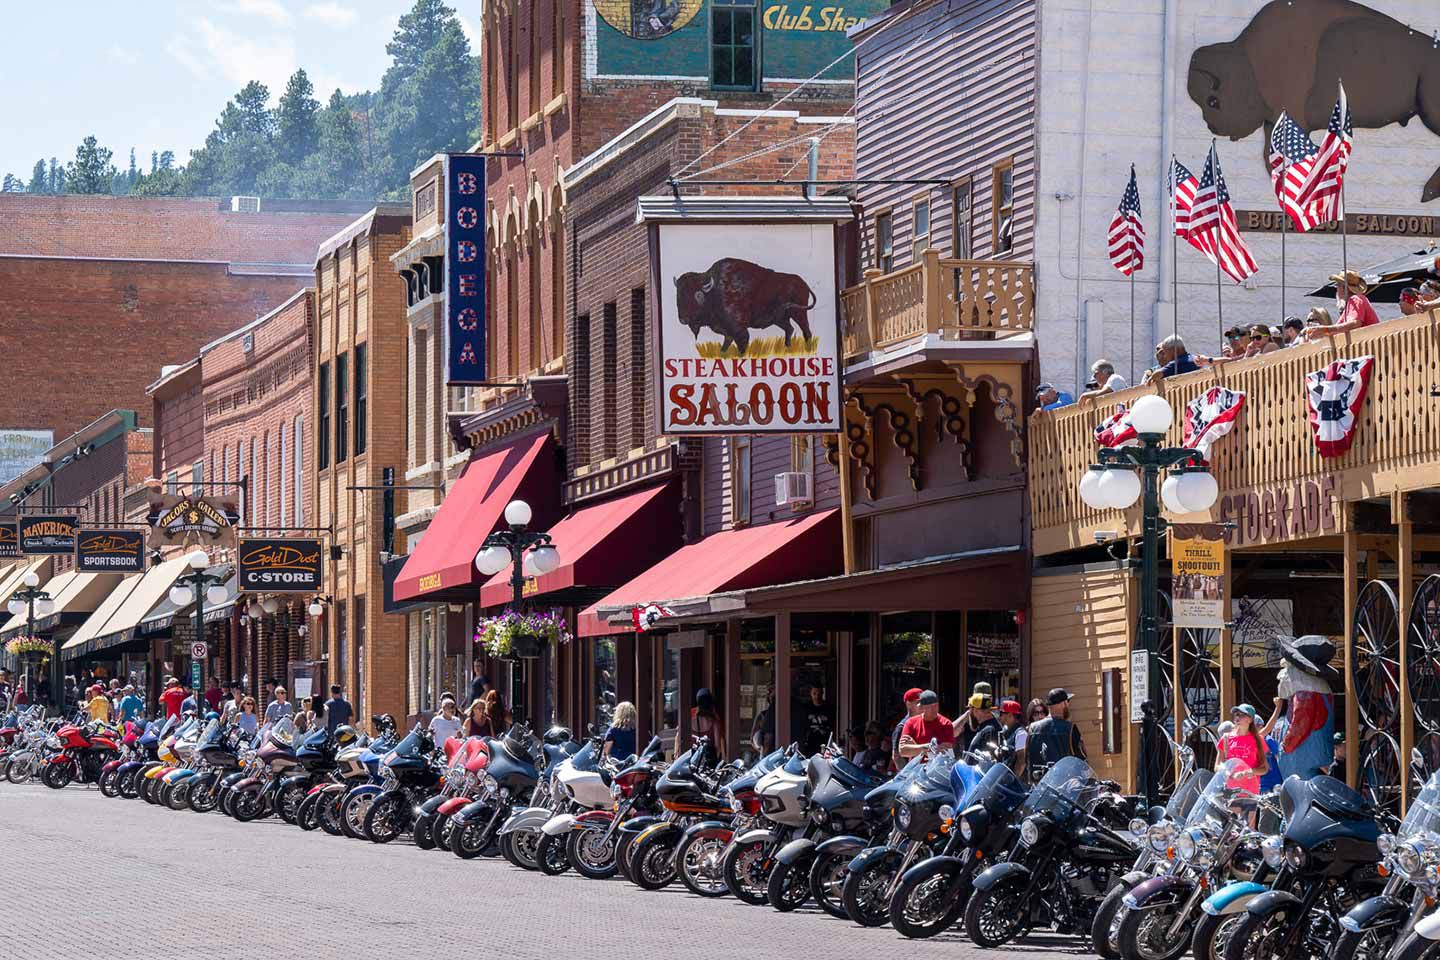 Meanwhile, in Deadwood, South Dakota, Main Street’s motorcycle-only parking fills up.